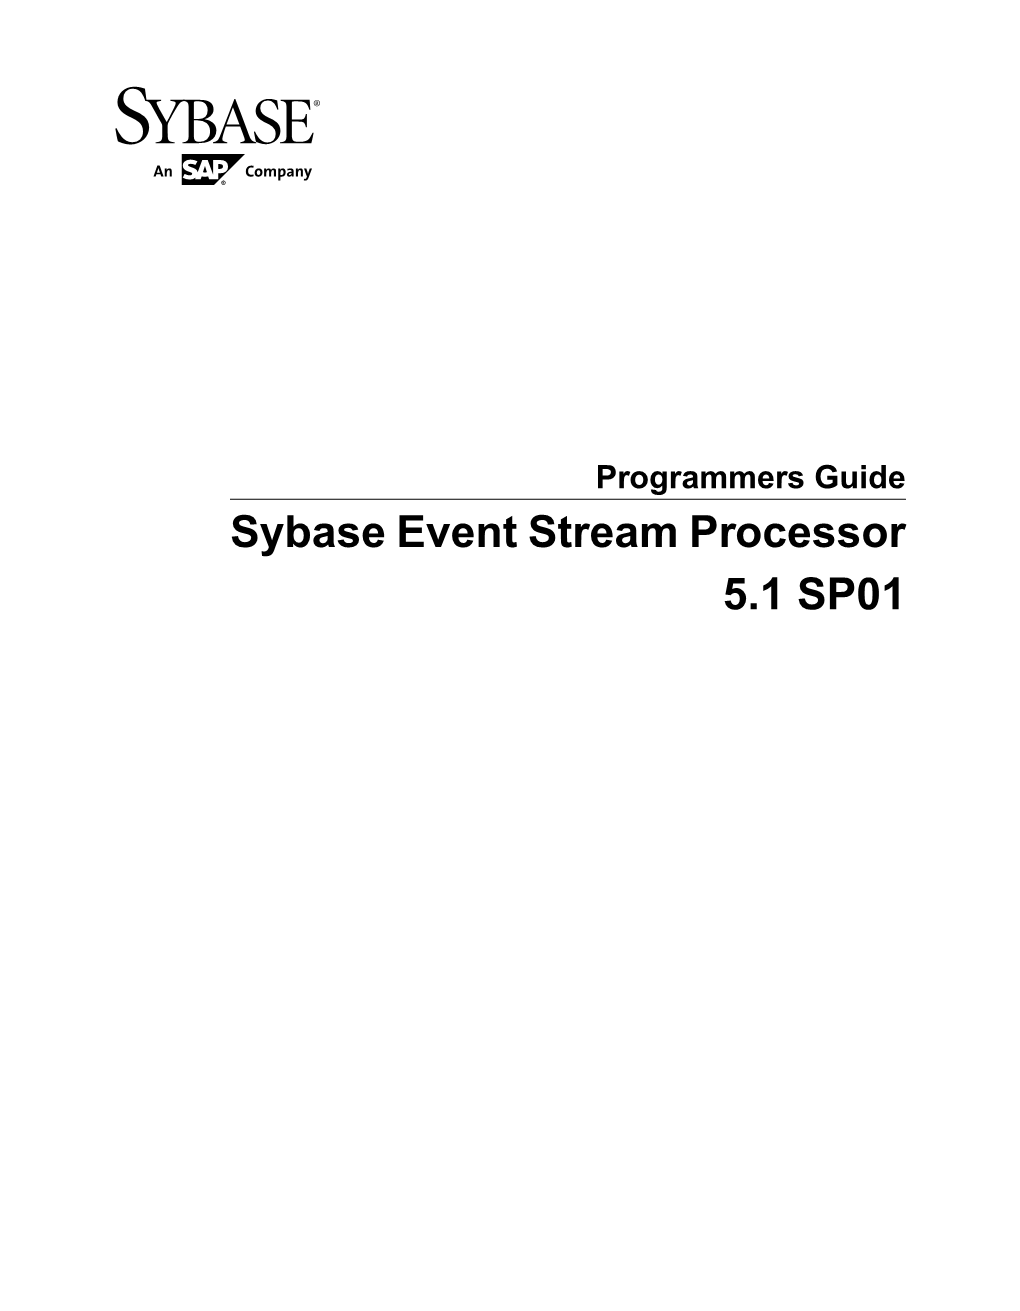 Programmers Guide Sybase Event Stream Processor 5.1 SP01 DOCUMENT ID: DC01612-01-0511-01 LAST REVISED: November 2012 Copyright © 2012 by Sybase, Inc